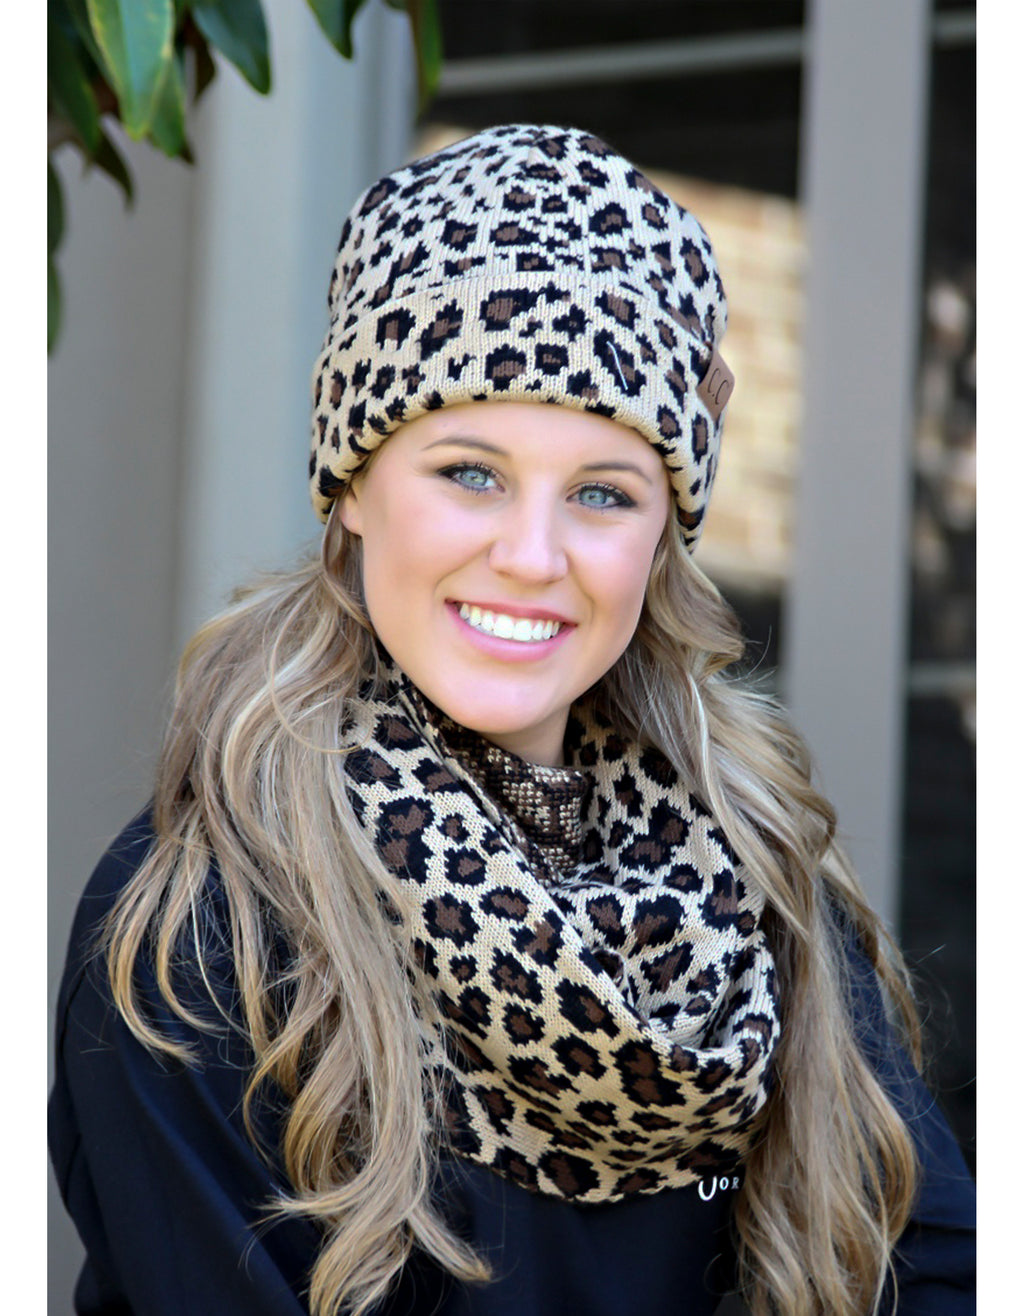 Stay Trendy This Fall: 3 Ways To Rock Leopard Print